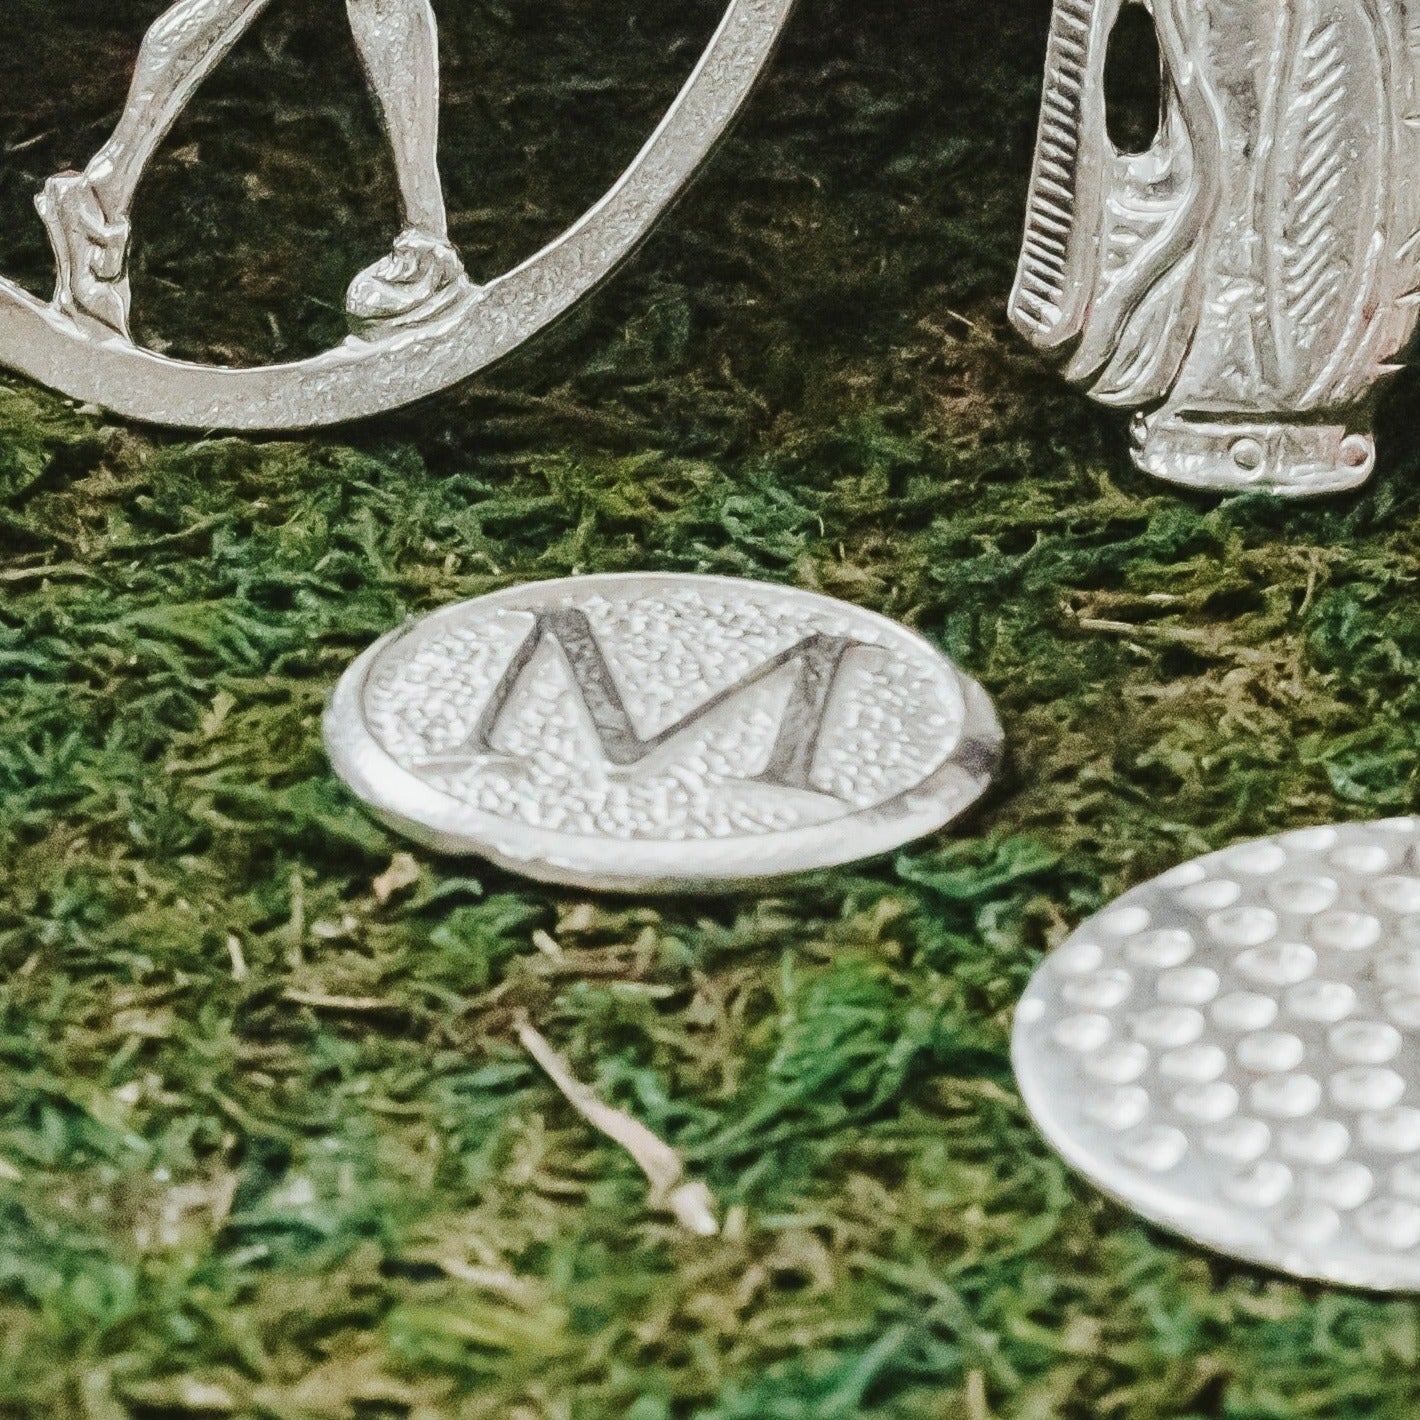 Unique Father's Day Gifts - Monogram Letter Golf Ball Marker